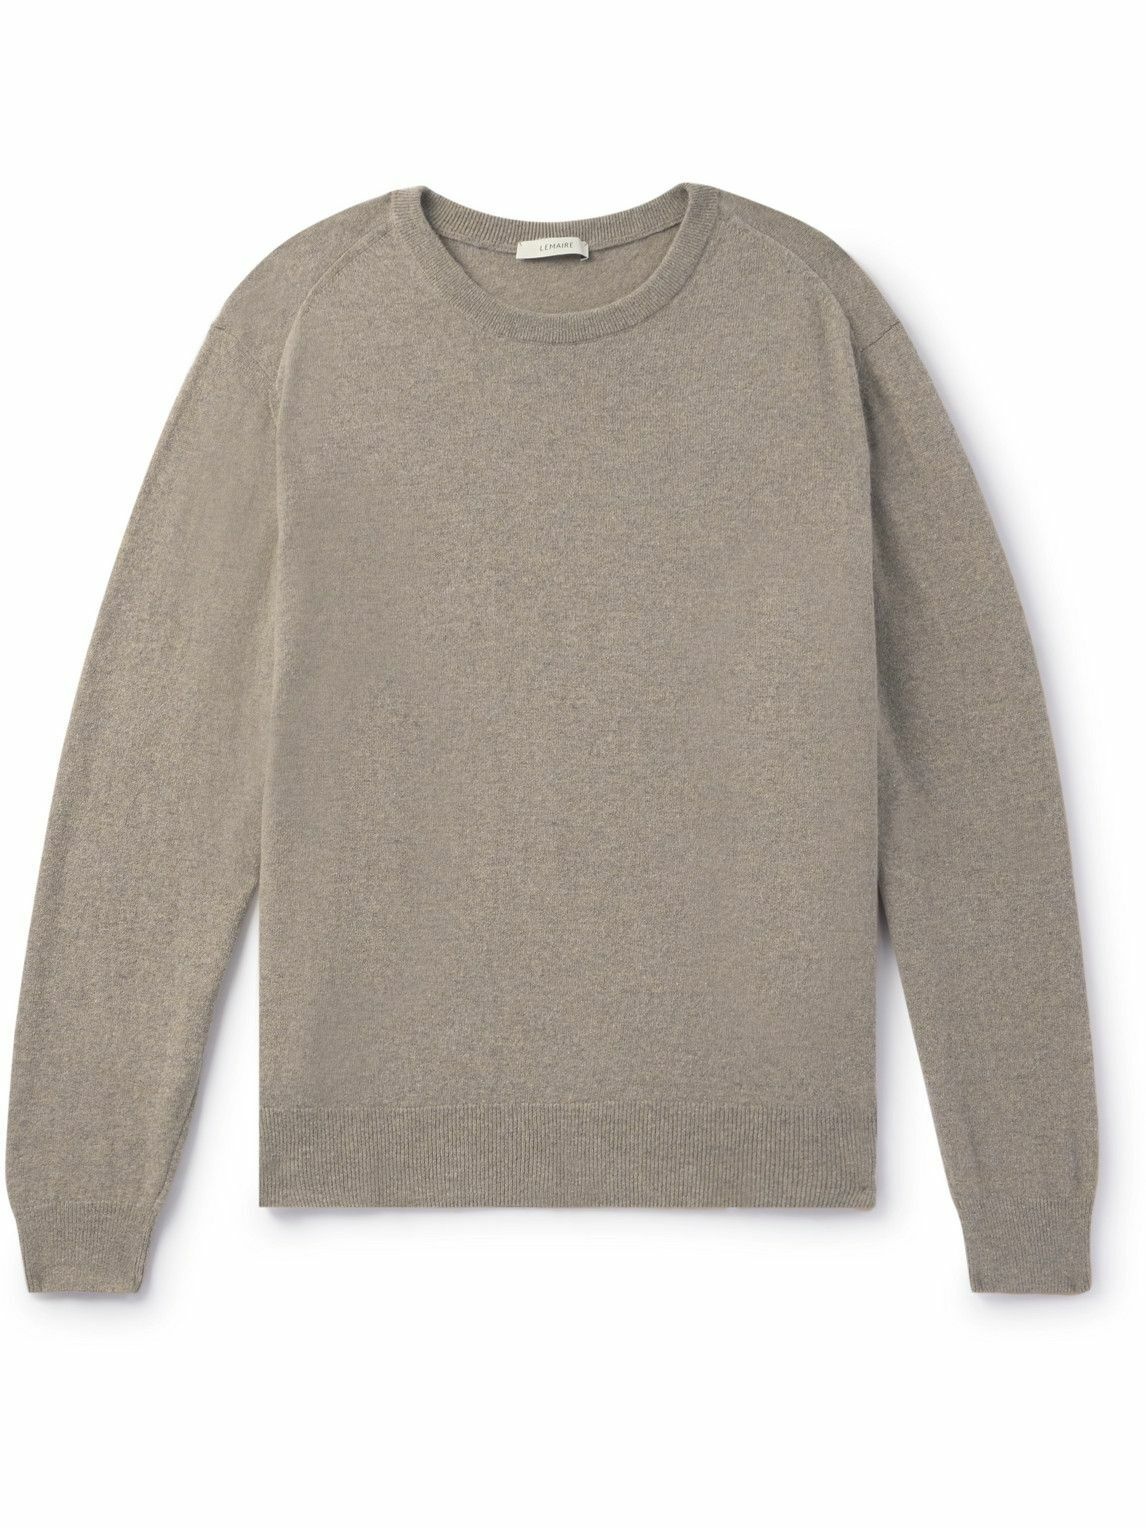 Photo: LEMAIRE - Wool-Blend Sweater - Gray